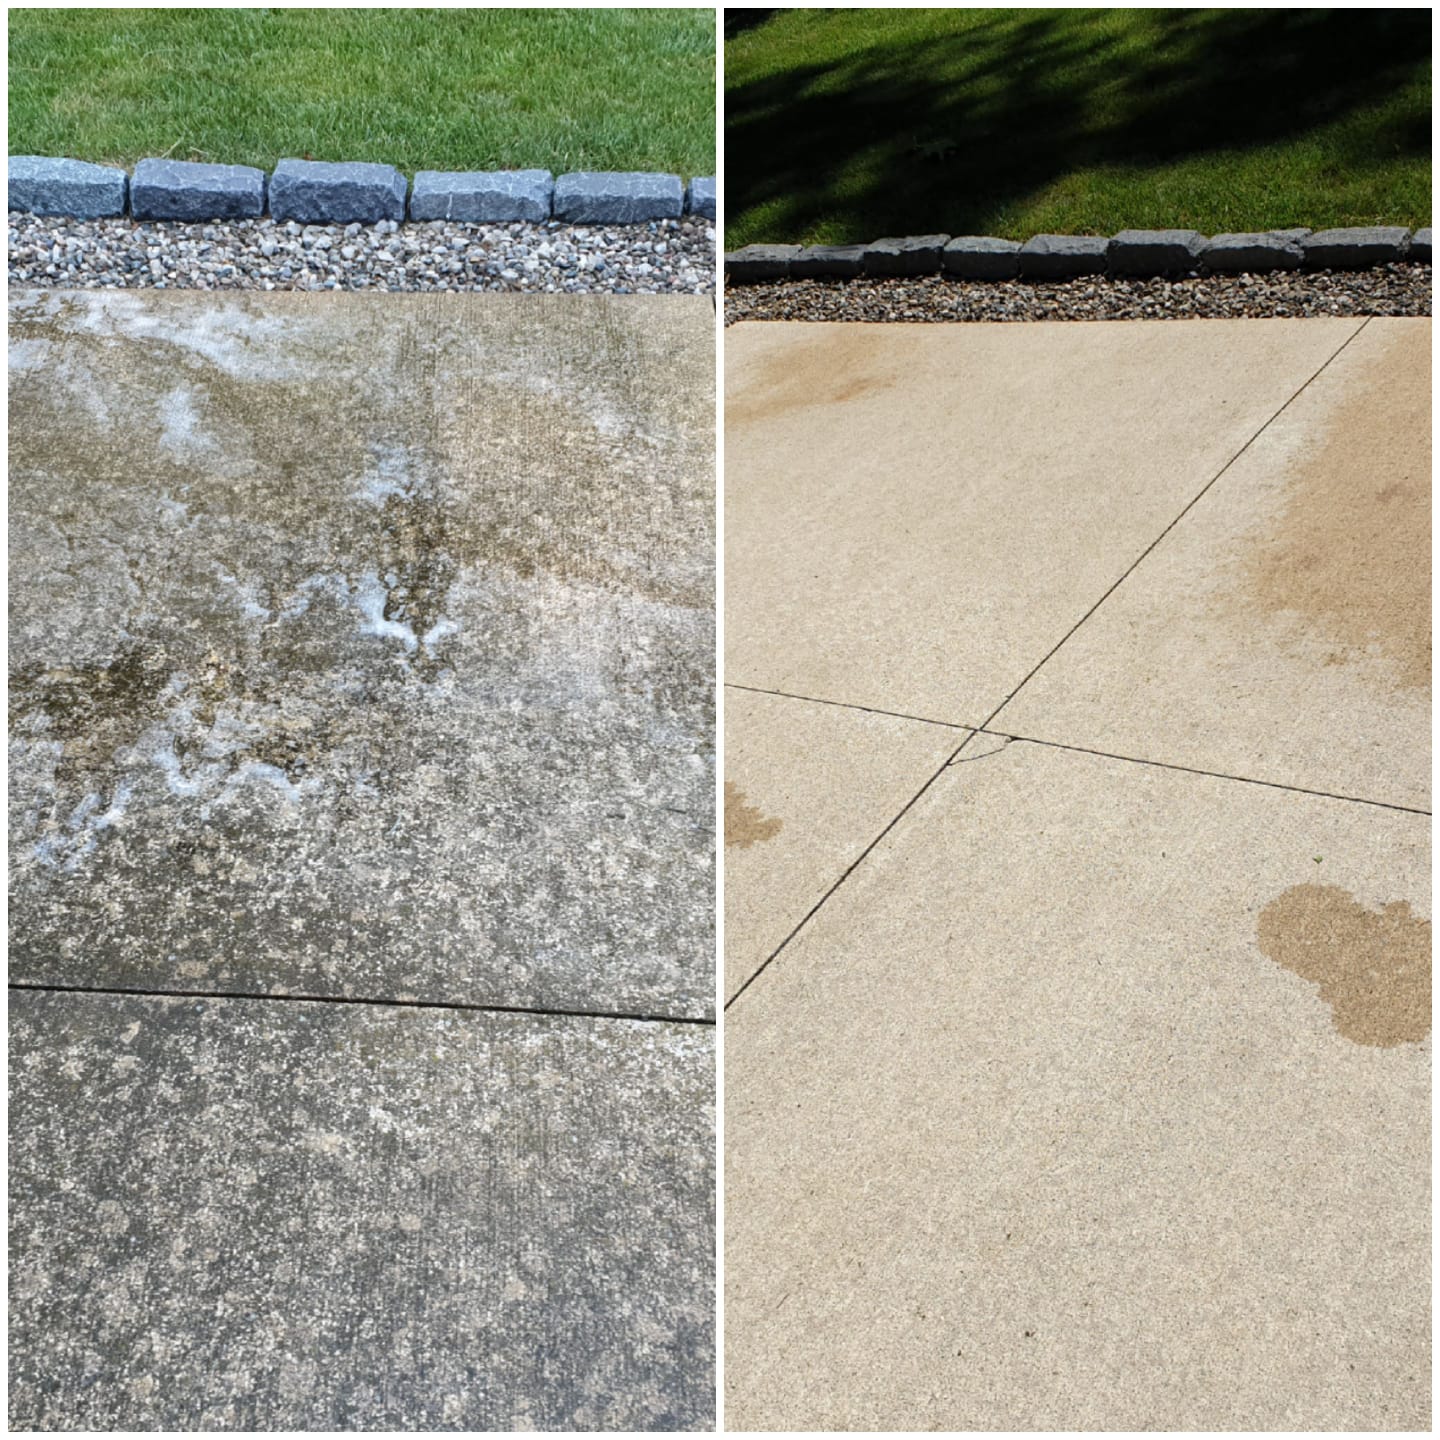 Hamilton Ontario Concrete Driveway Before And After Concrete Washing